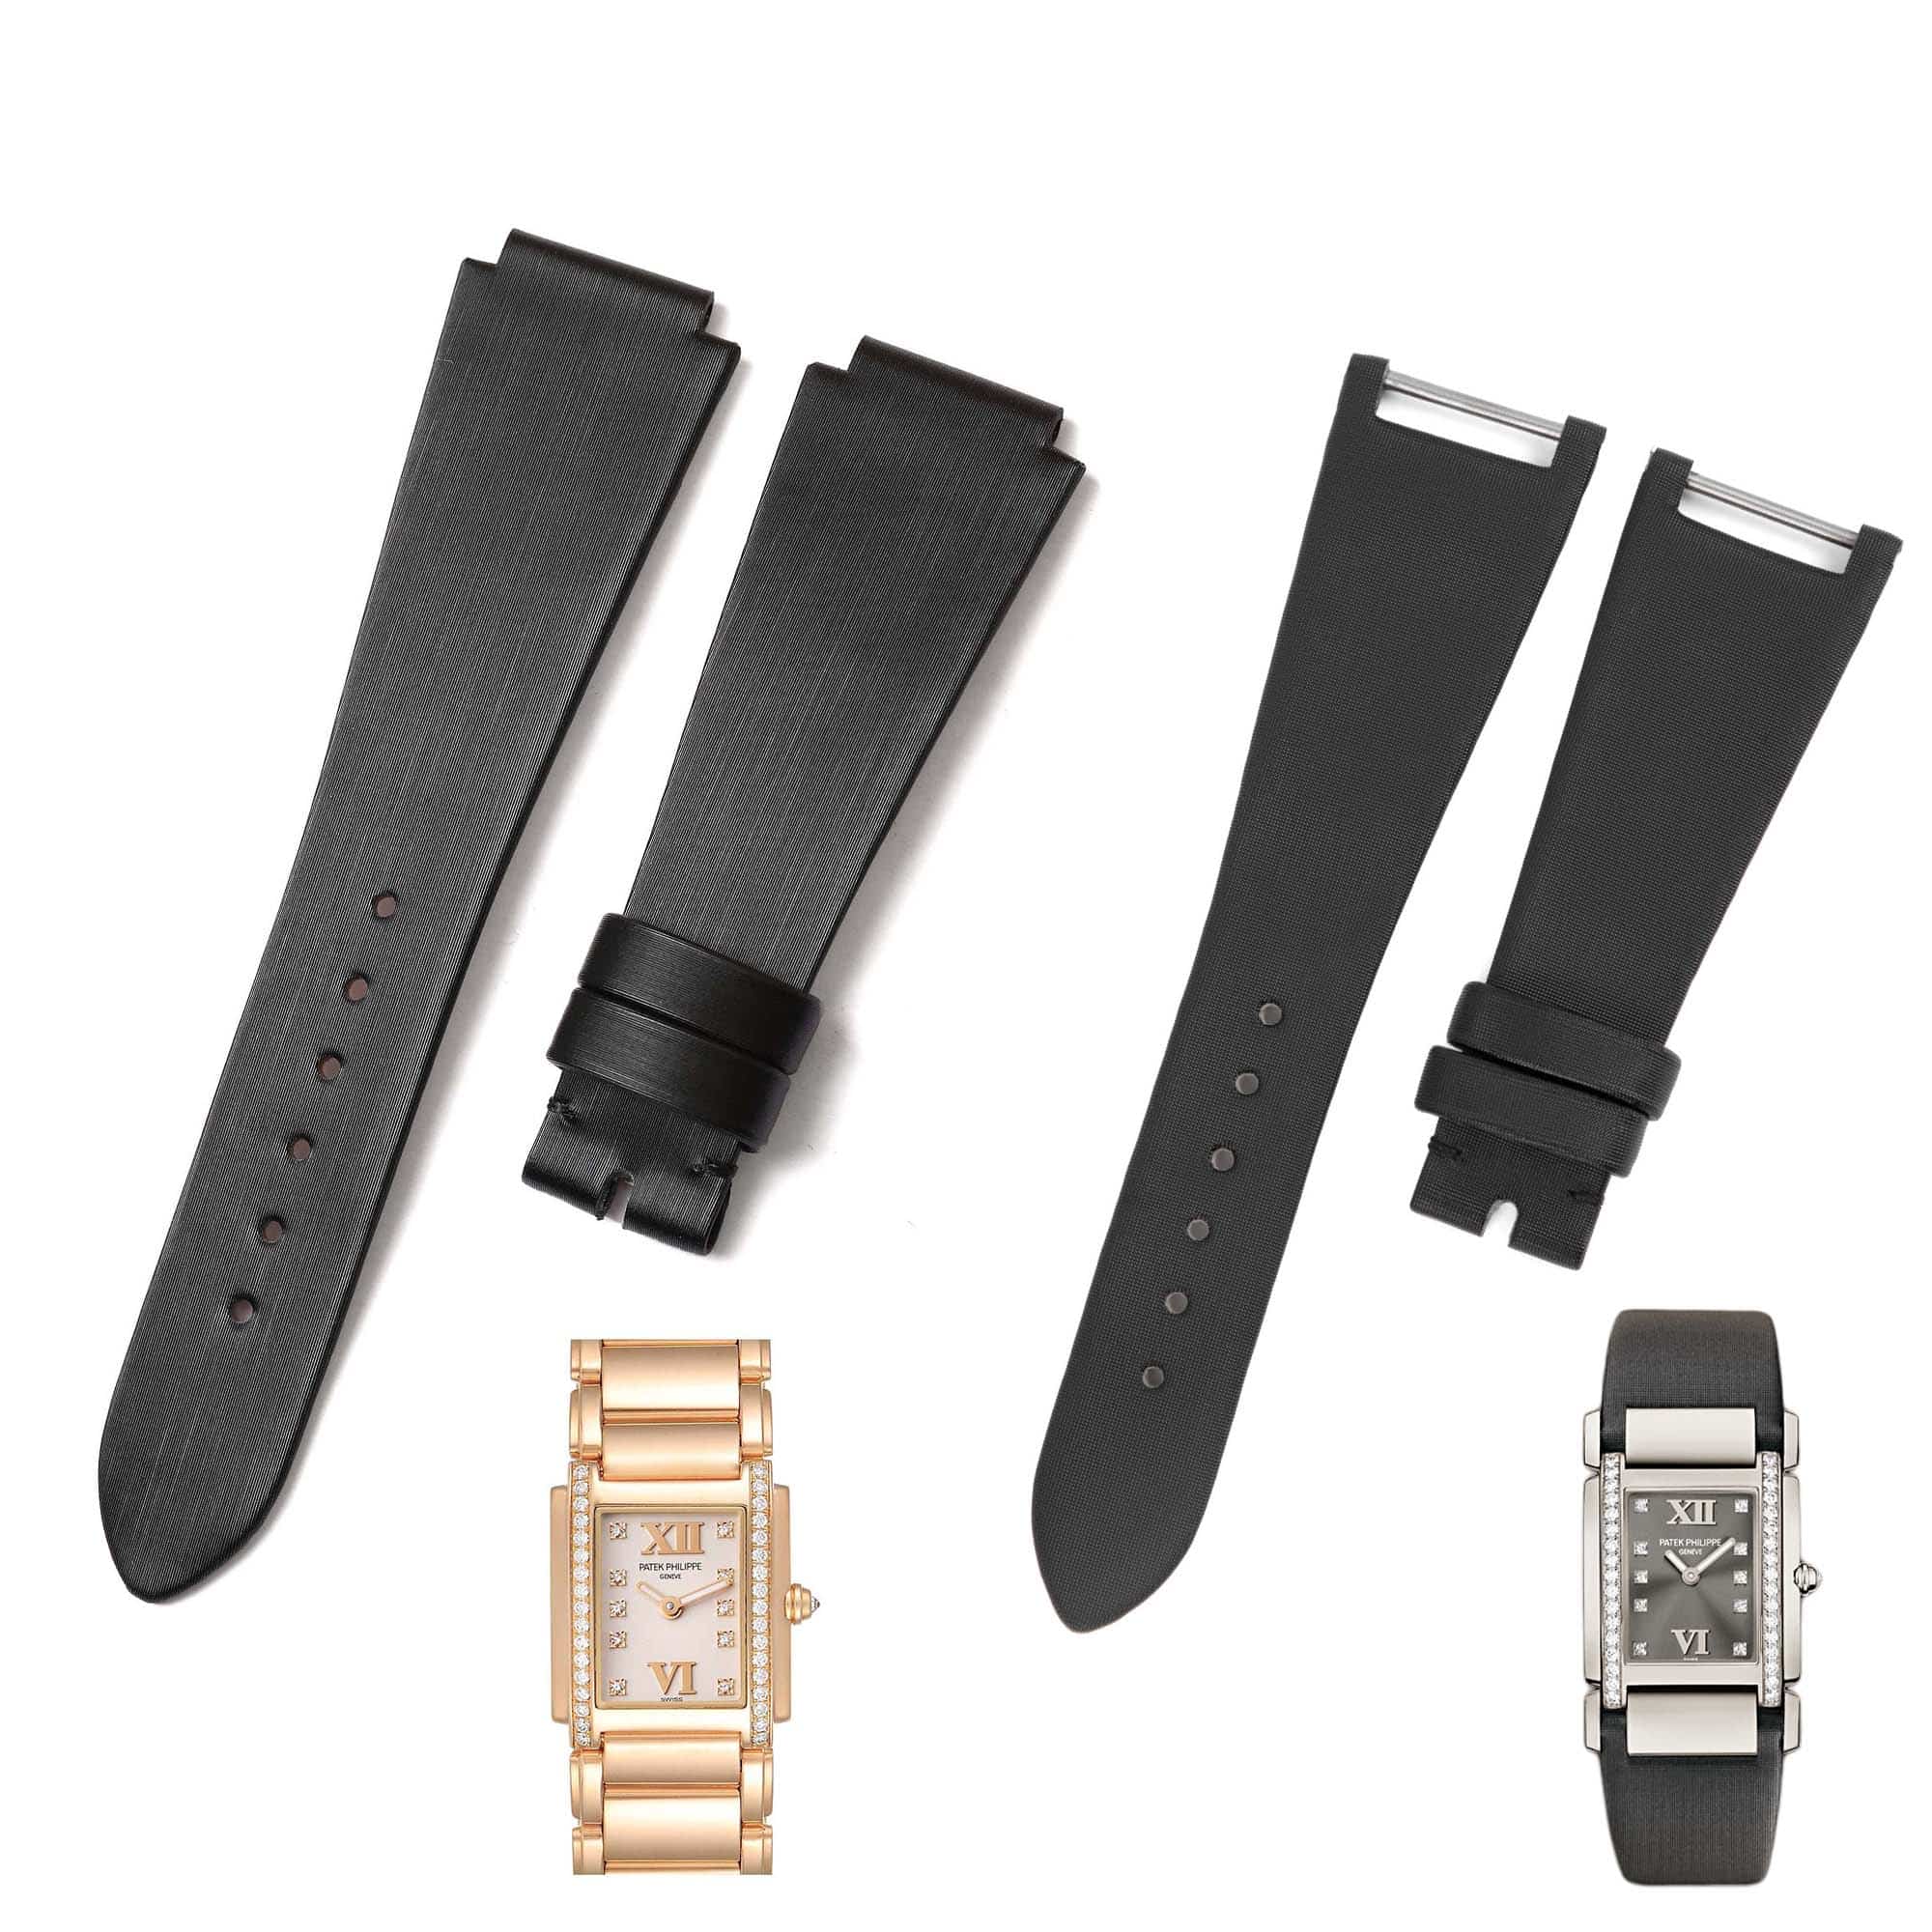 Difference between Patek Philippe Twenty 4 watch band replacement